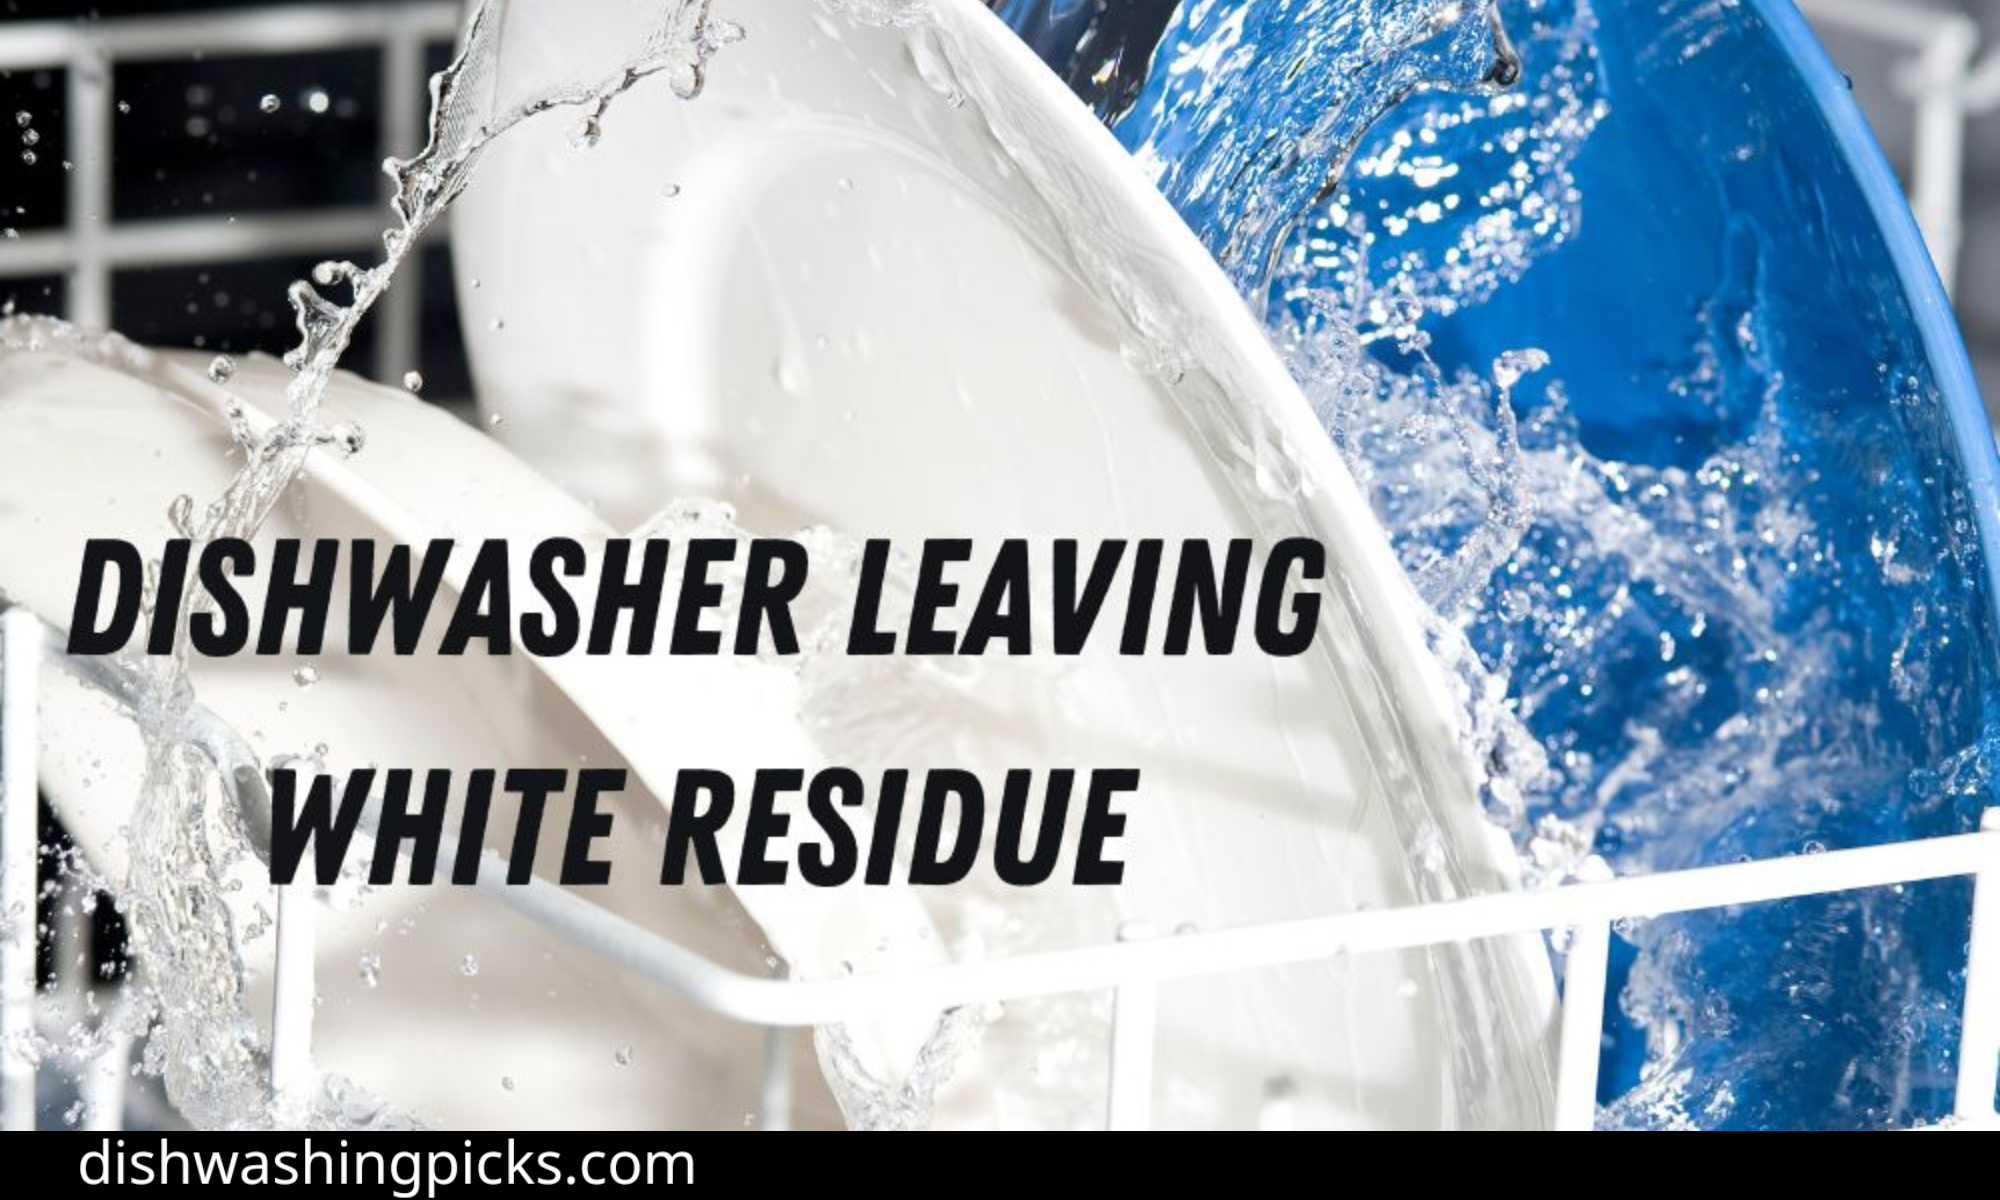 How to get rid of white residue from dishwasher